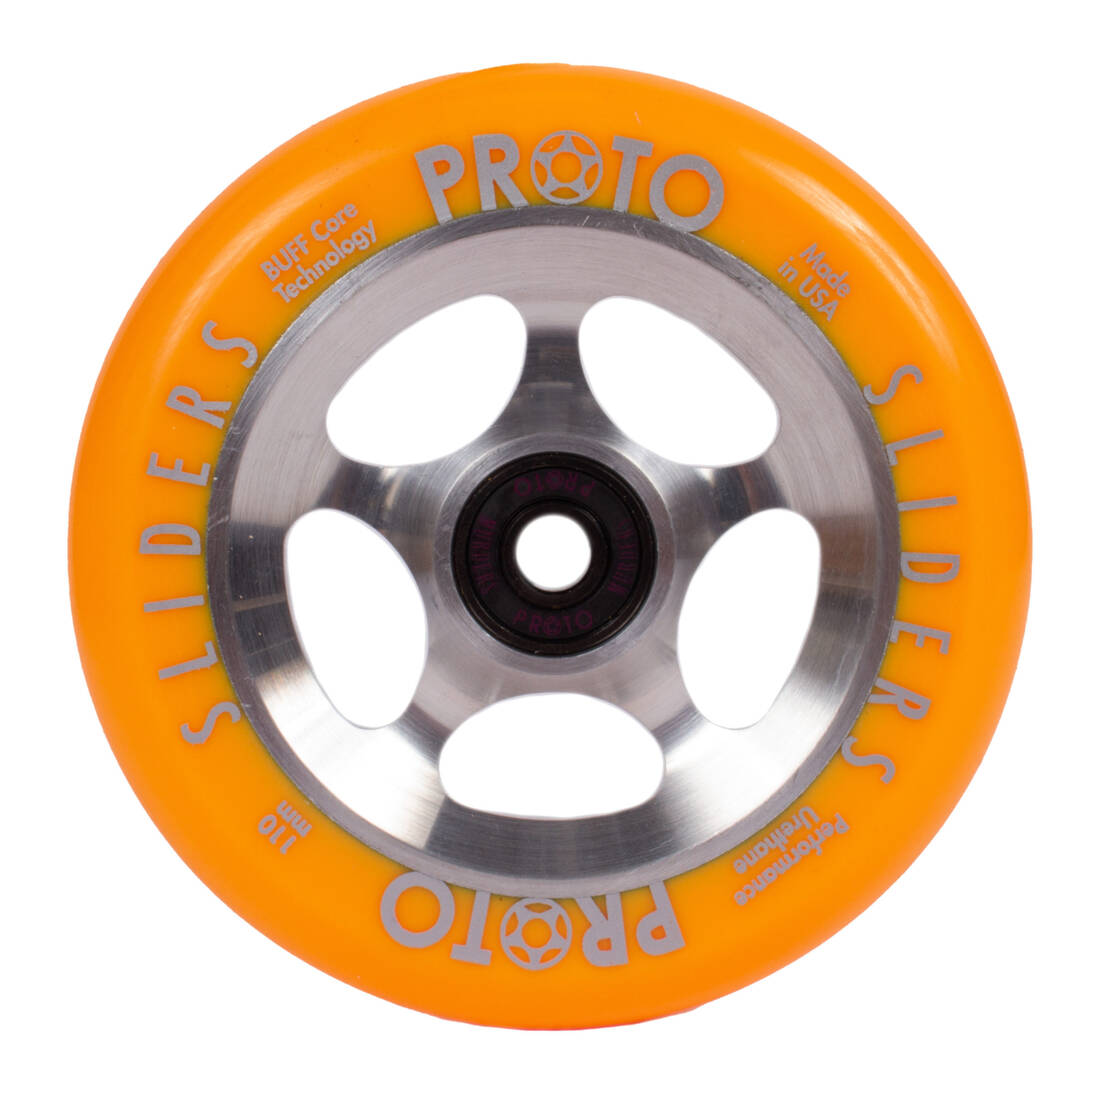 An image of Proto Sliders Starbright 110mm Pro Scooter Wheel - Orange / Raw